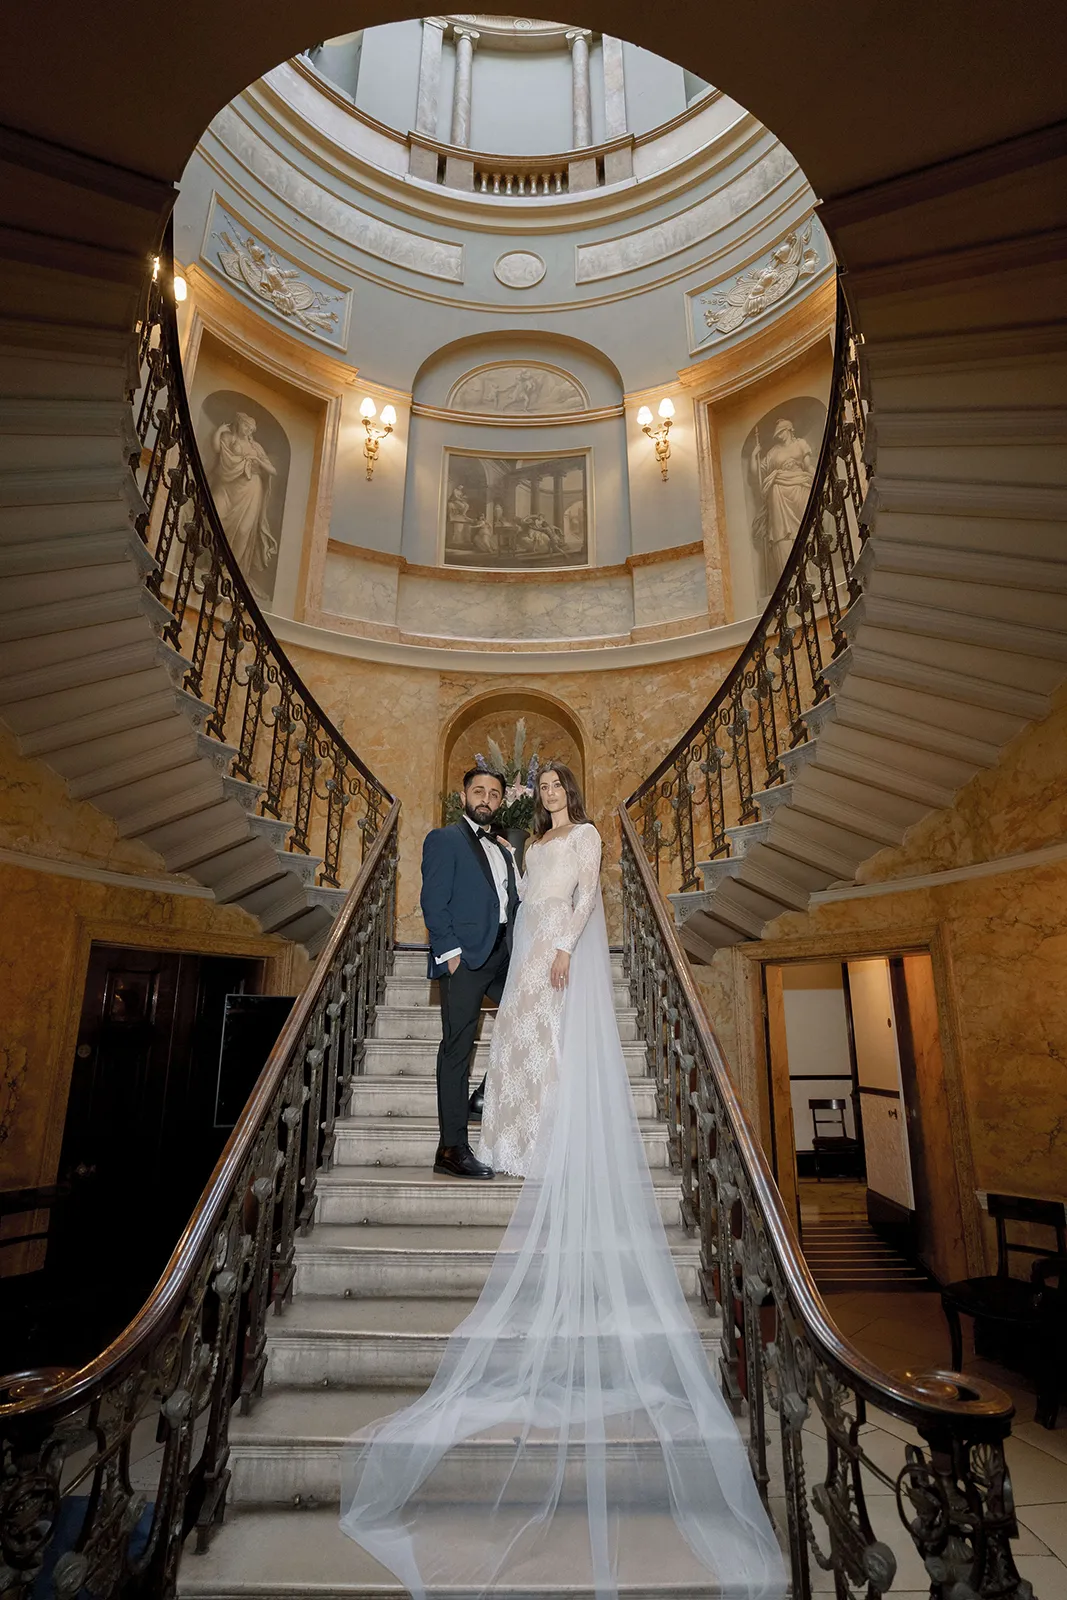 The bride and groom are standing on a grand staircase inside Home House London. The bride wears a long lace dress with a flowing train, and the groom is in a dark suit. The staircase has intricate railings, and the backdrop includes classical architectural details.